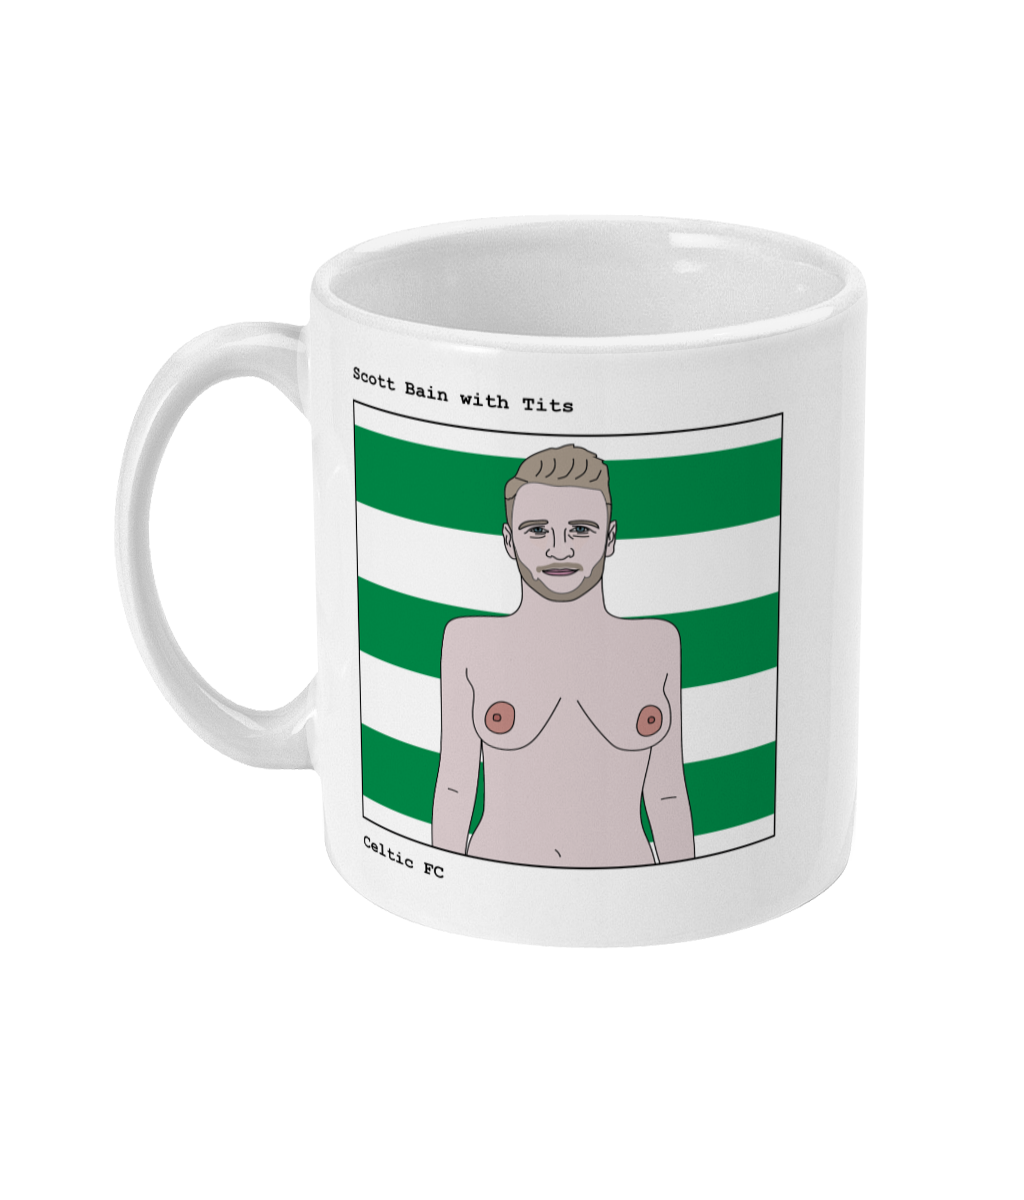 Scott Bain with Tits - Footballers with Tits